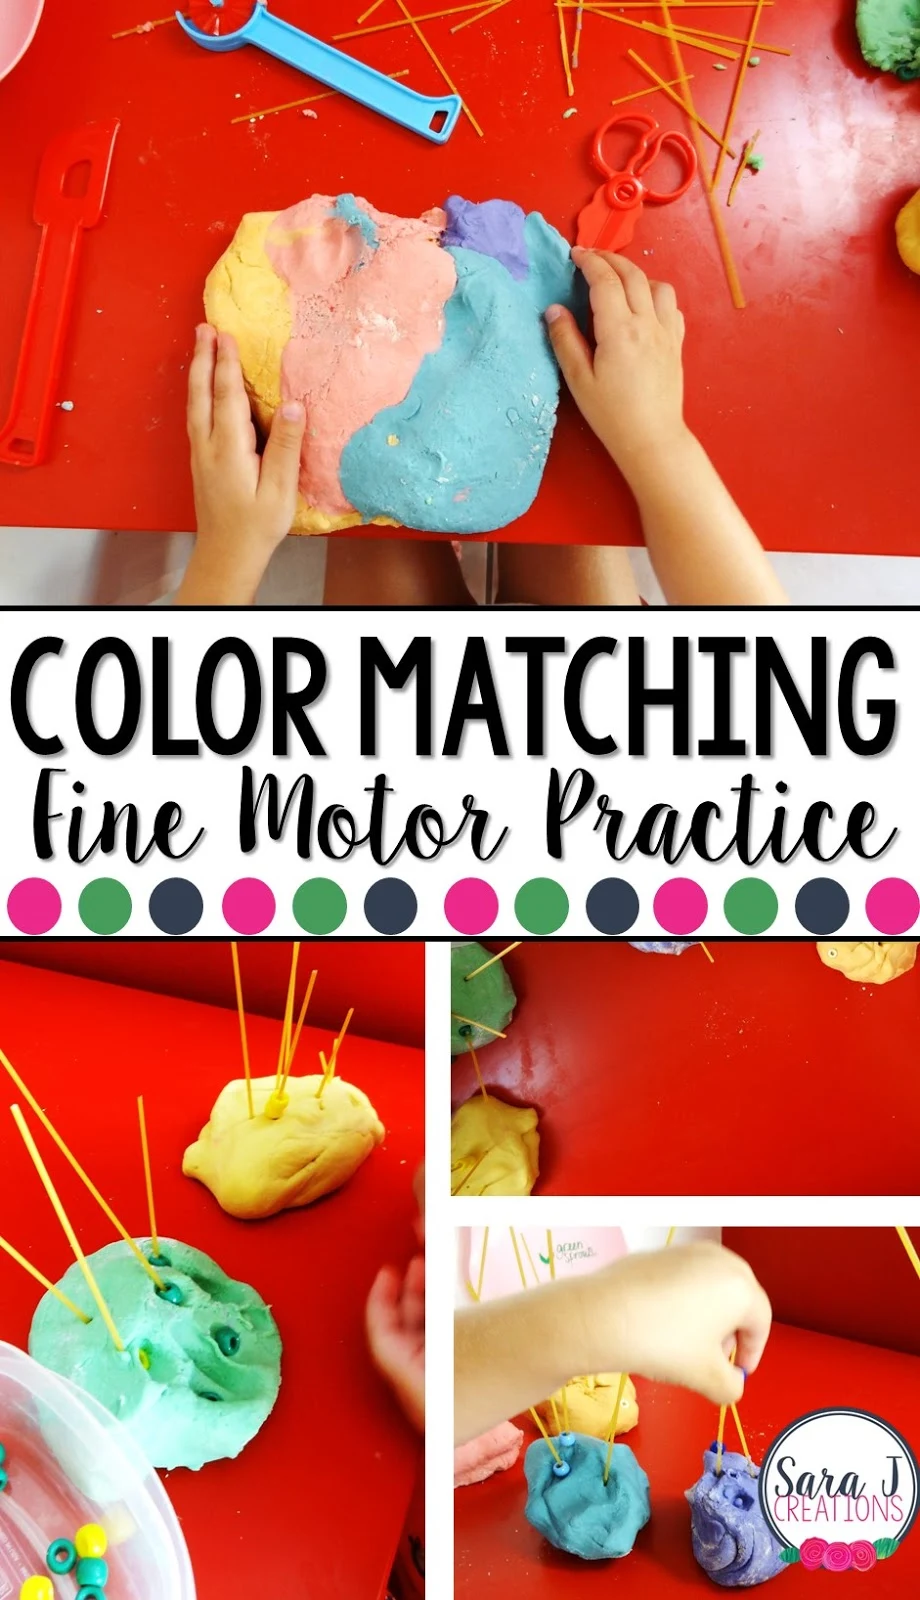 Playdough is such a fun way to practice fine motor skills and practice matching colors at the same time.  I loved this idea and we had our own spin on it.